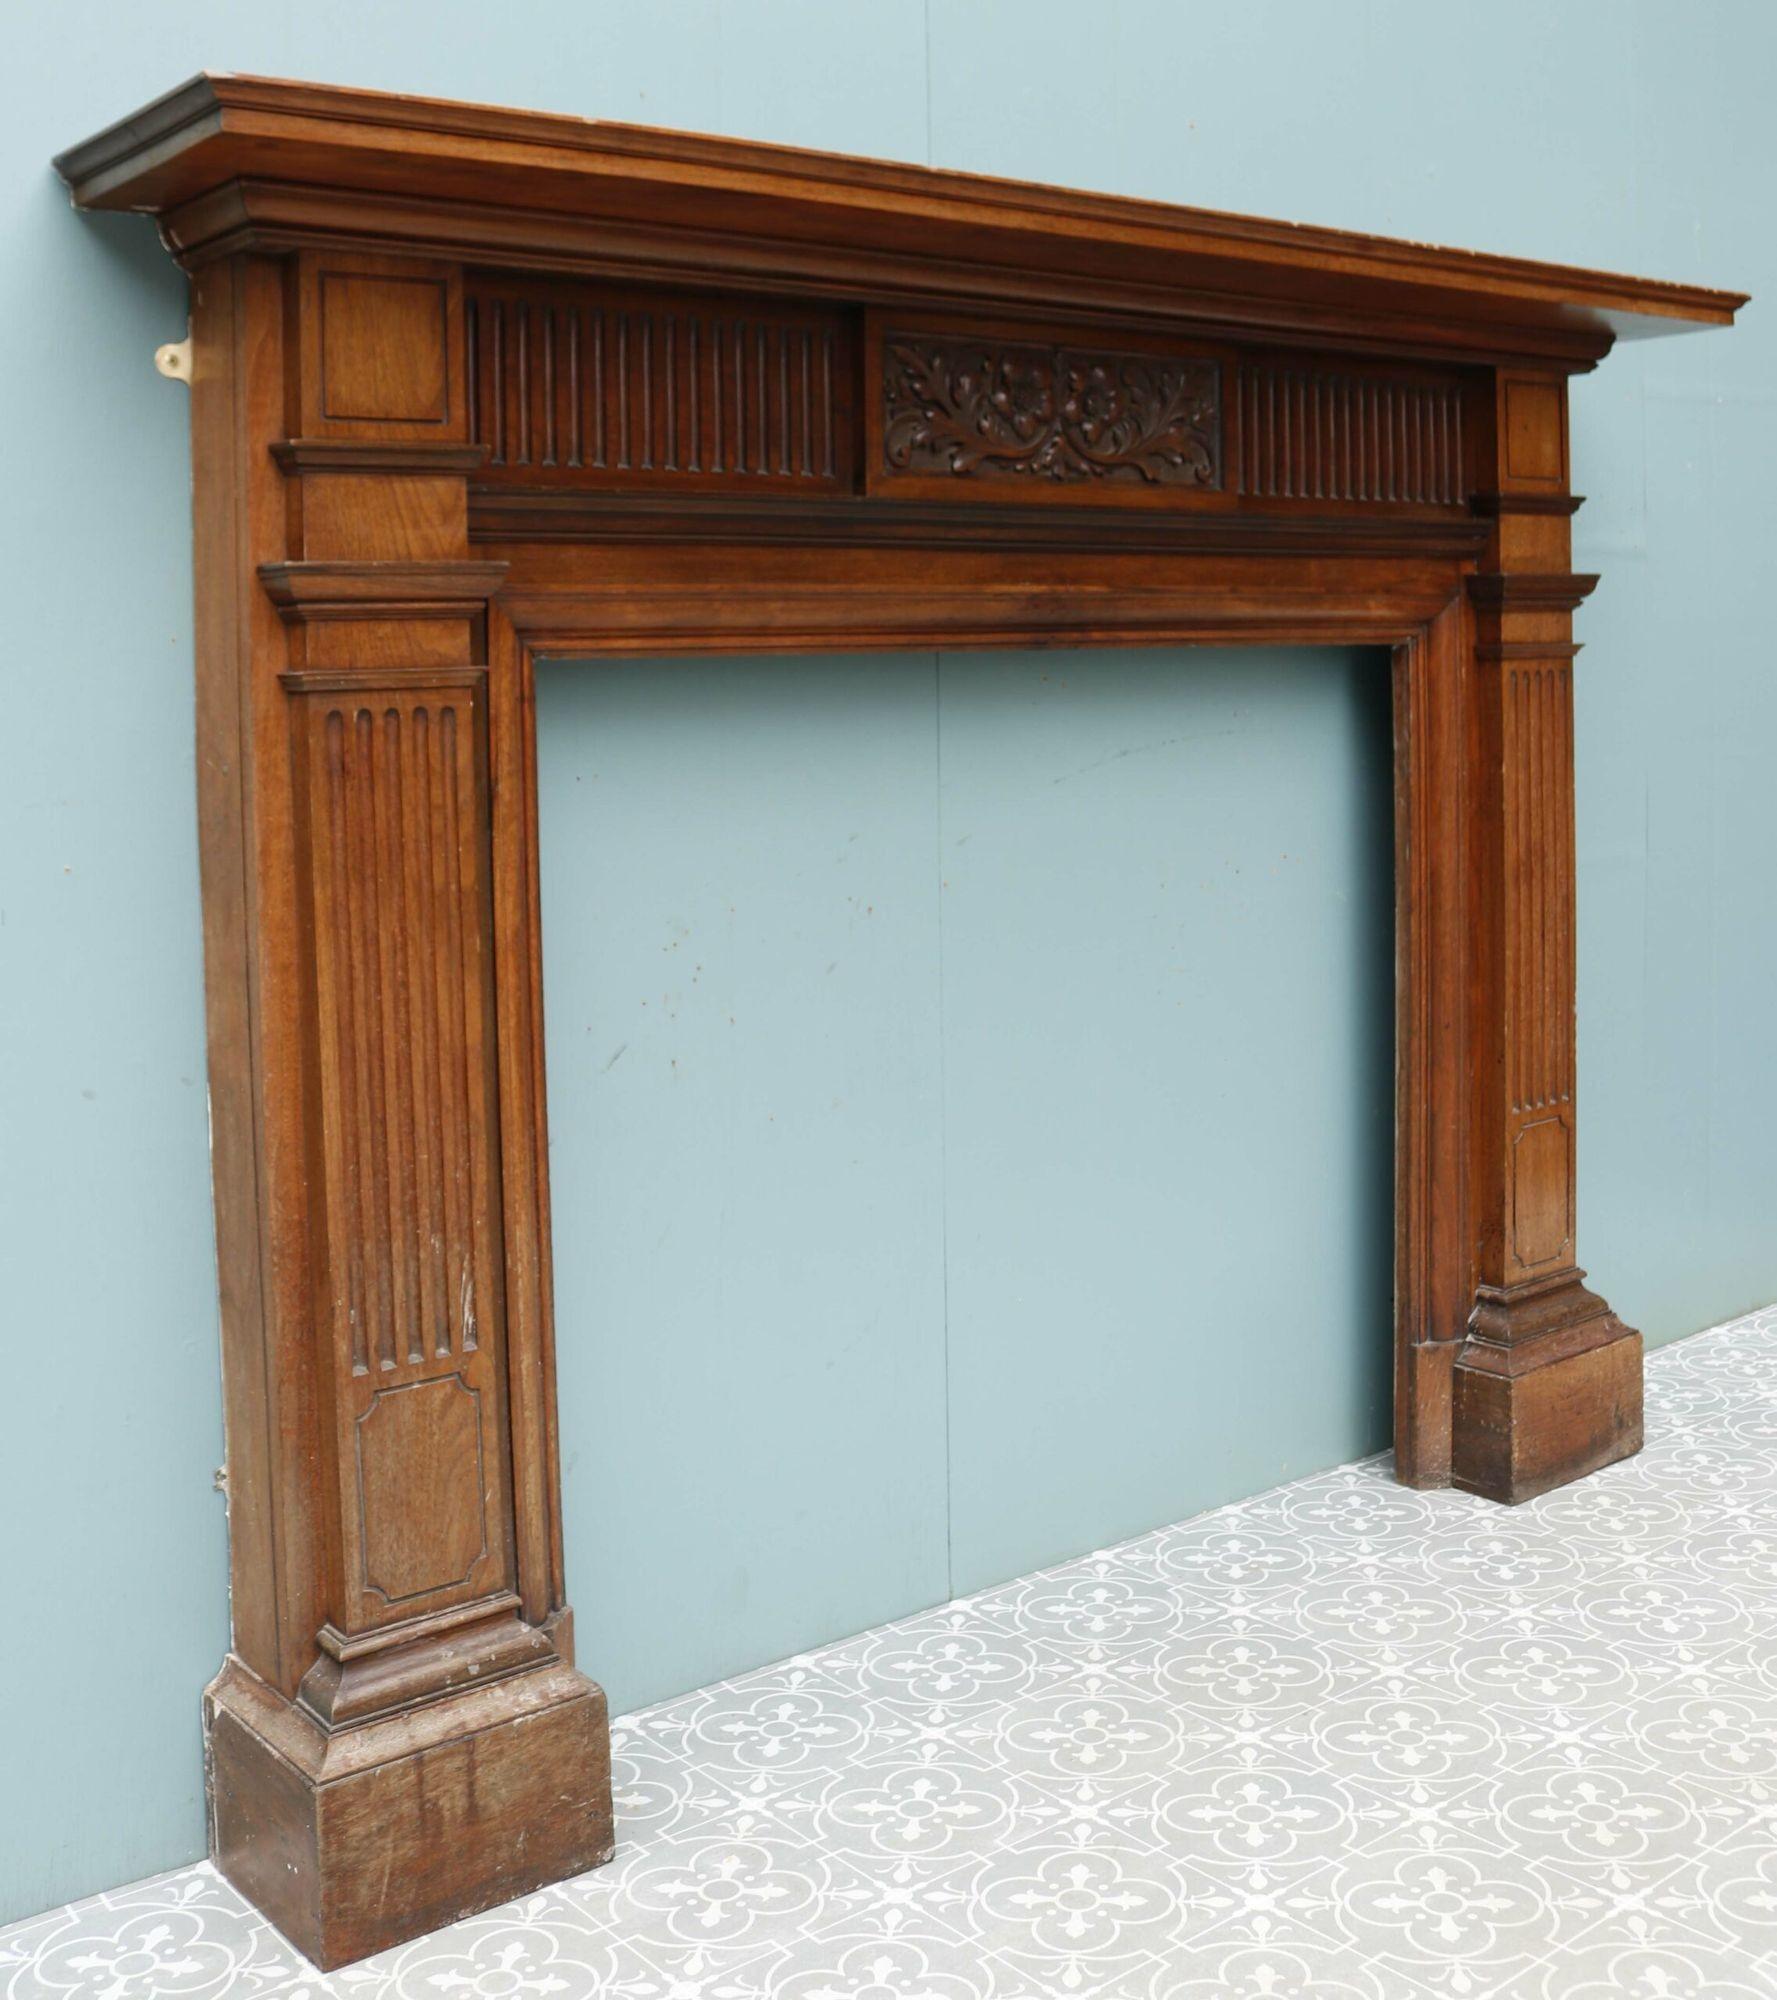 19th Century Antique Victorian Carved Timber Fire Mantel For Sale